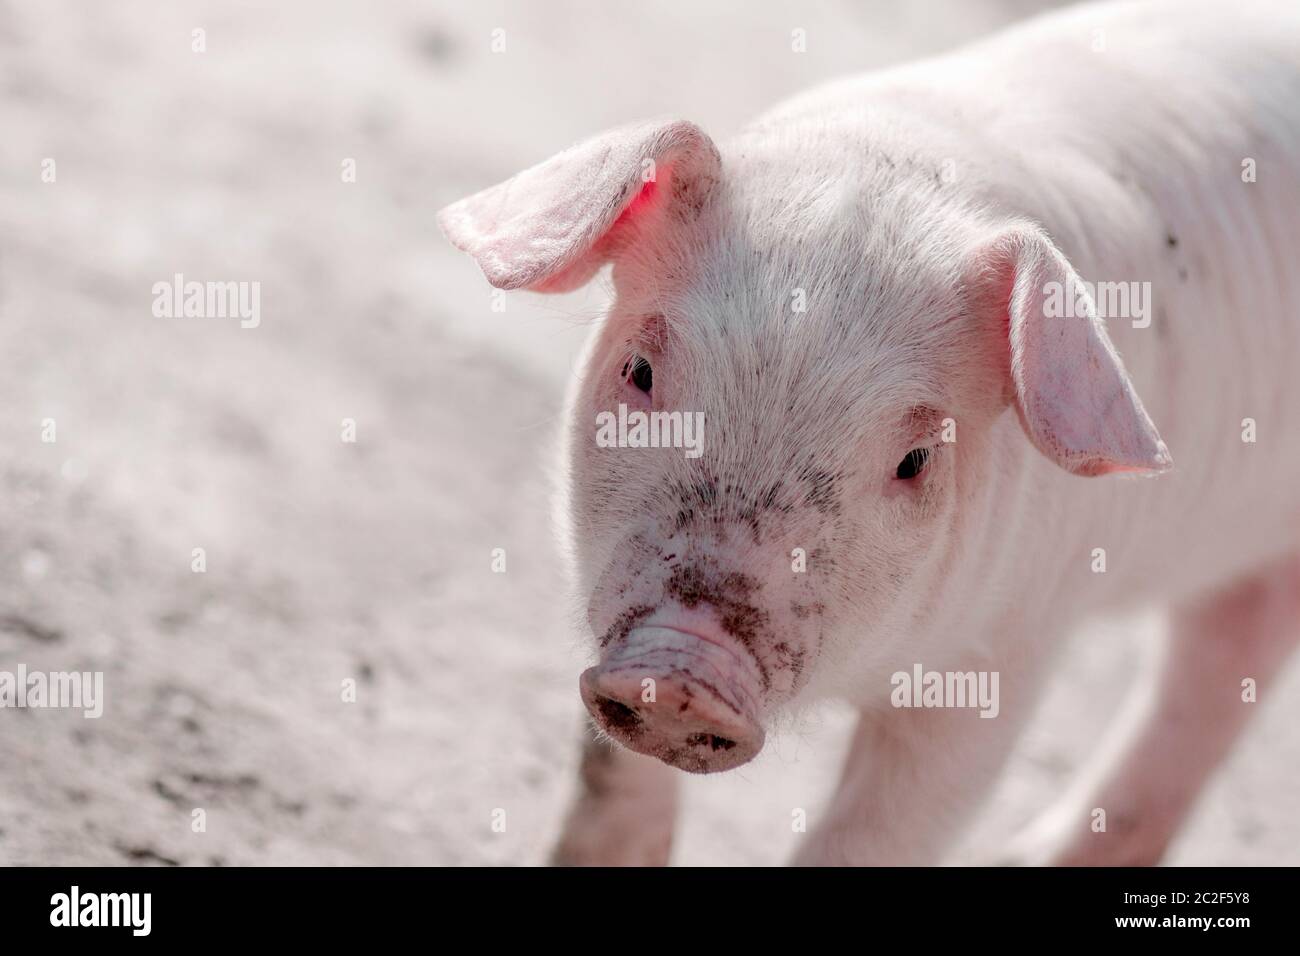 Animal portrait of dirty little domestic pig. Stock Photo